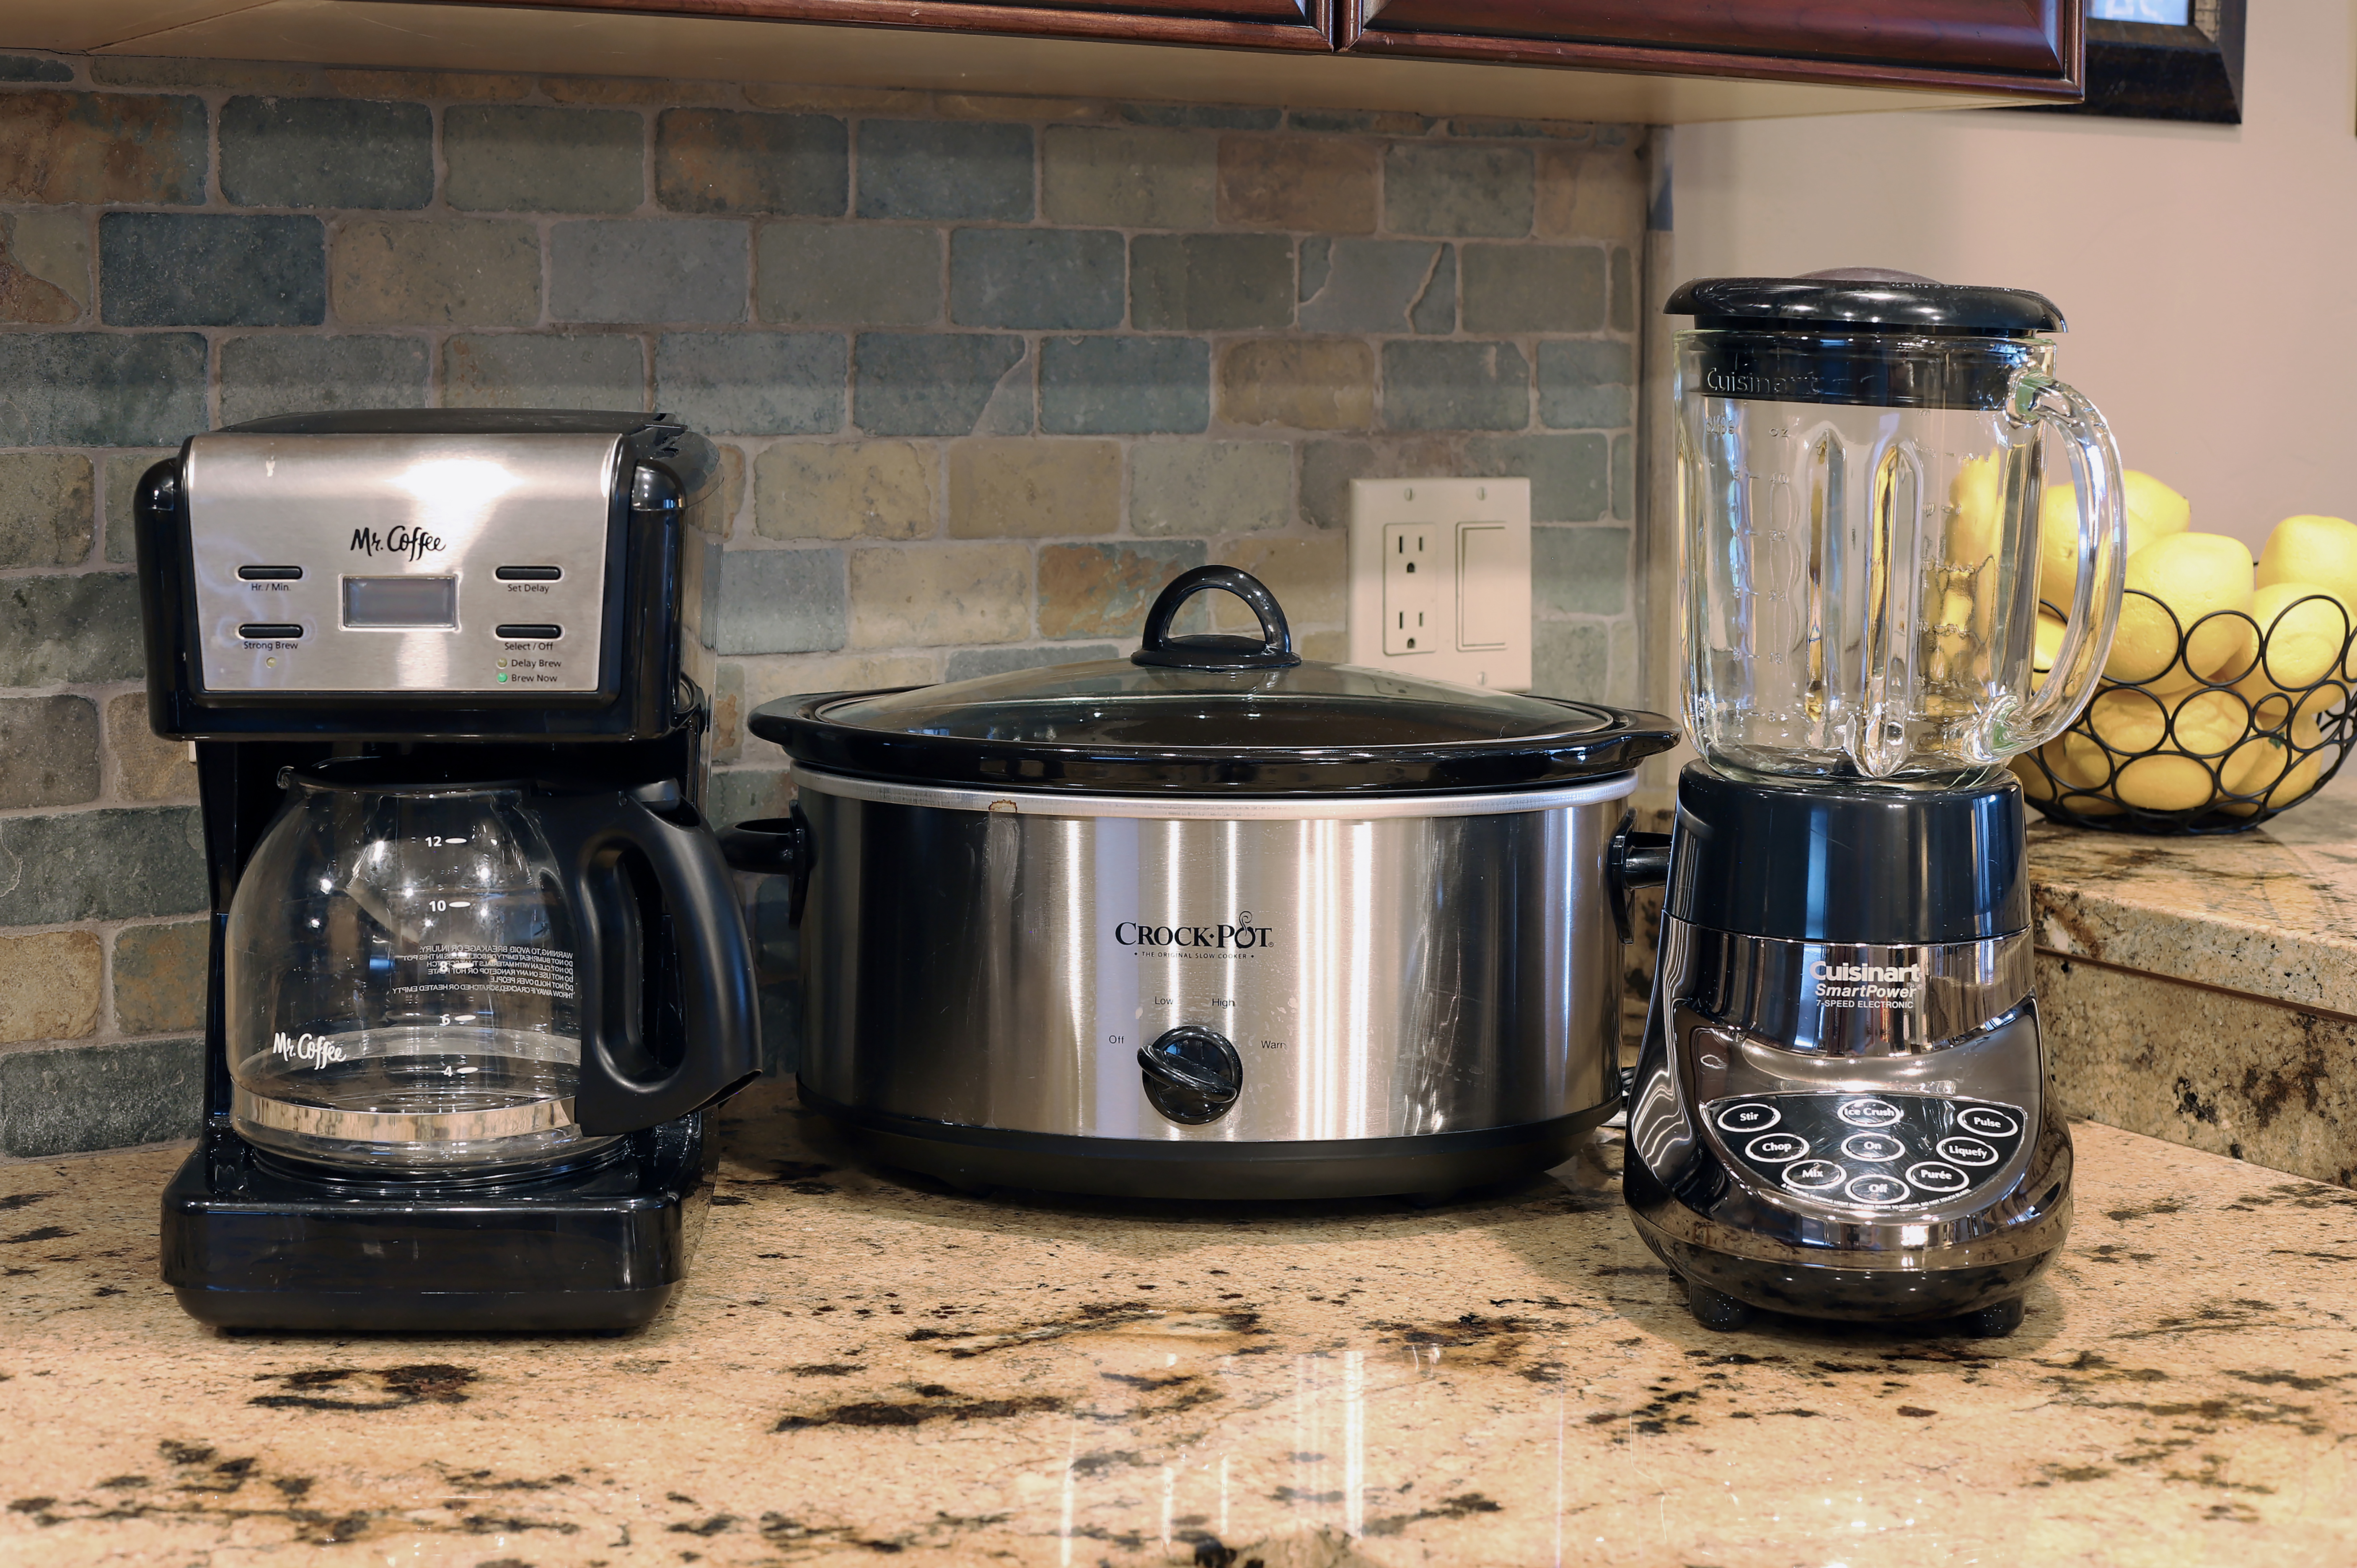 12 pot coffee maker, blender, toaster and crock pot included in the kitchen.